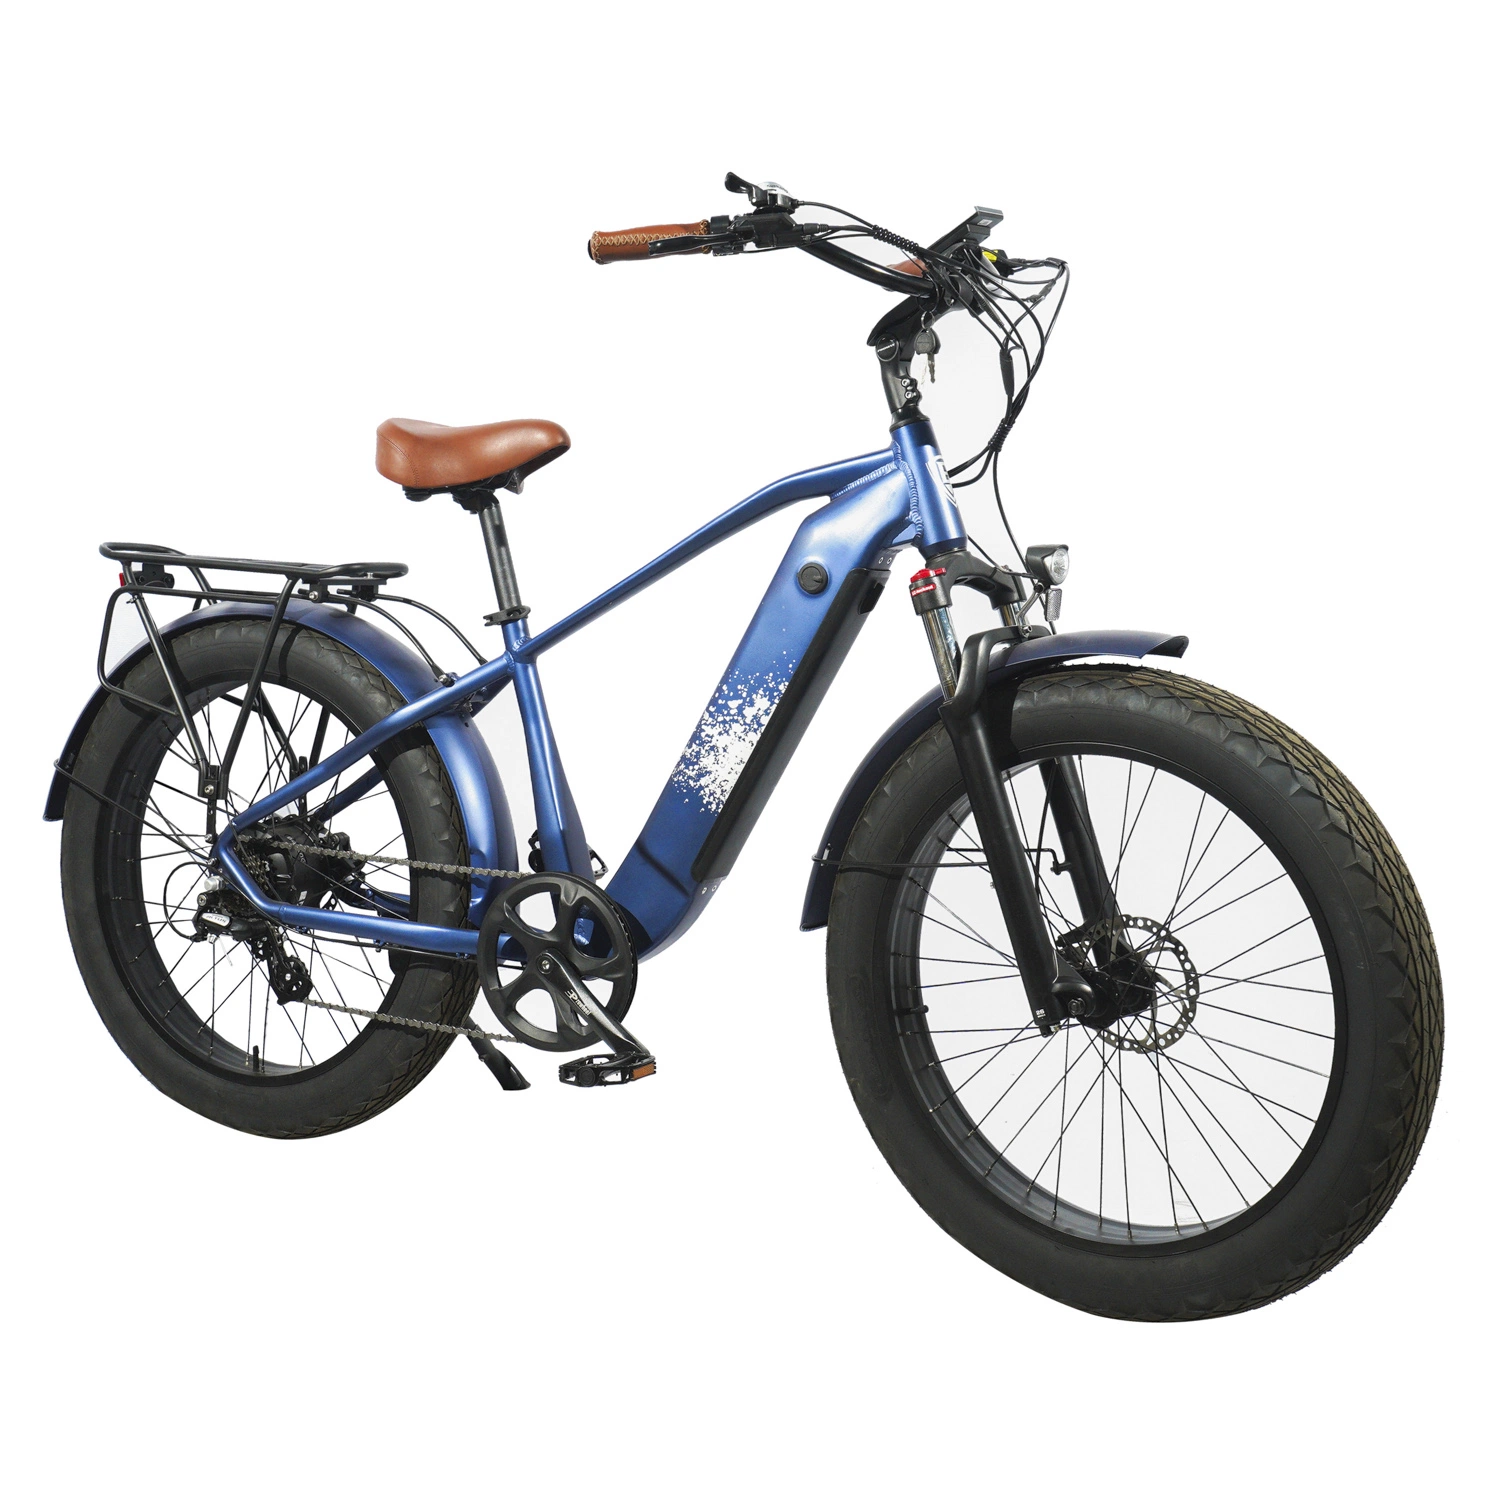 Cheap Adult 750W 72V Electric Fat Tire Bike Dirt Bikes Chinese Prices